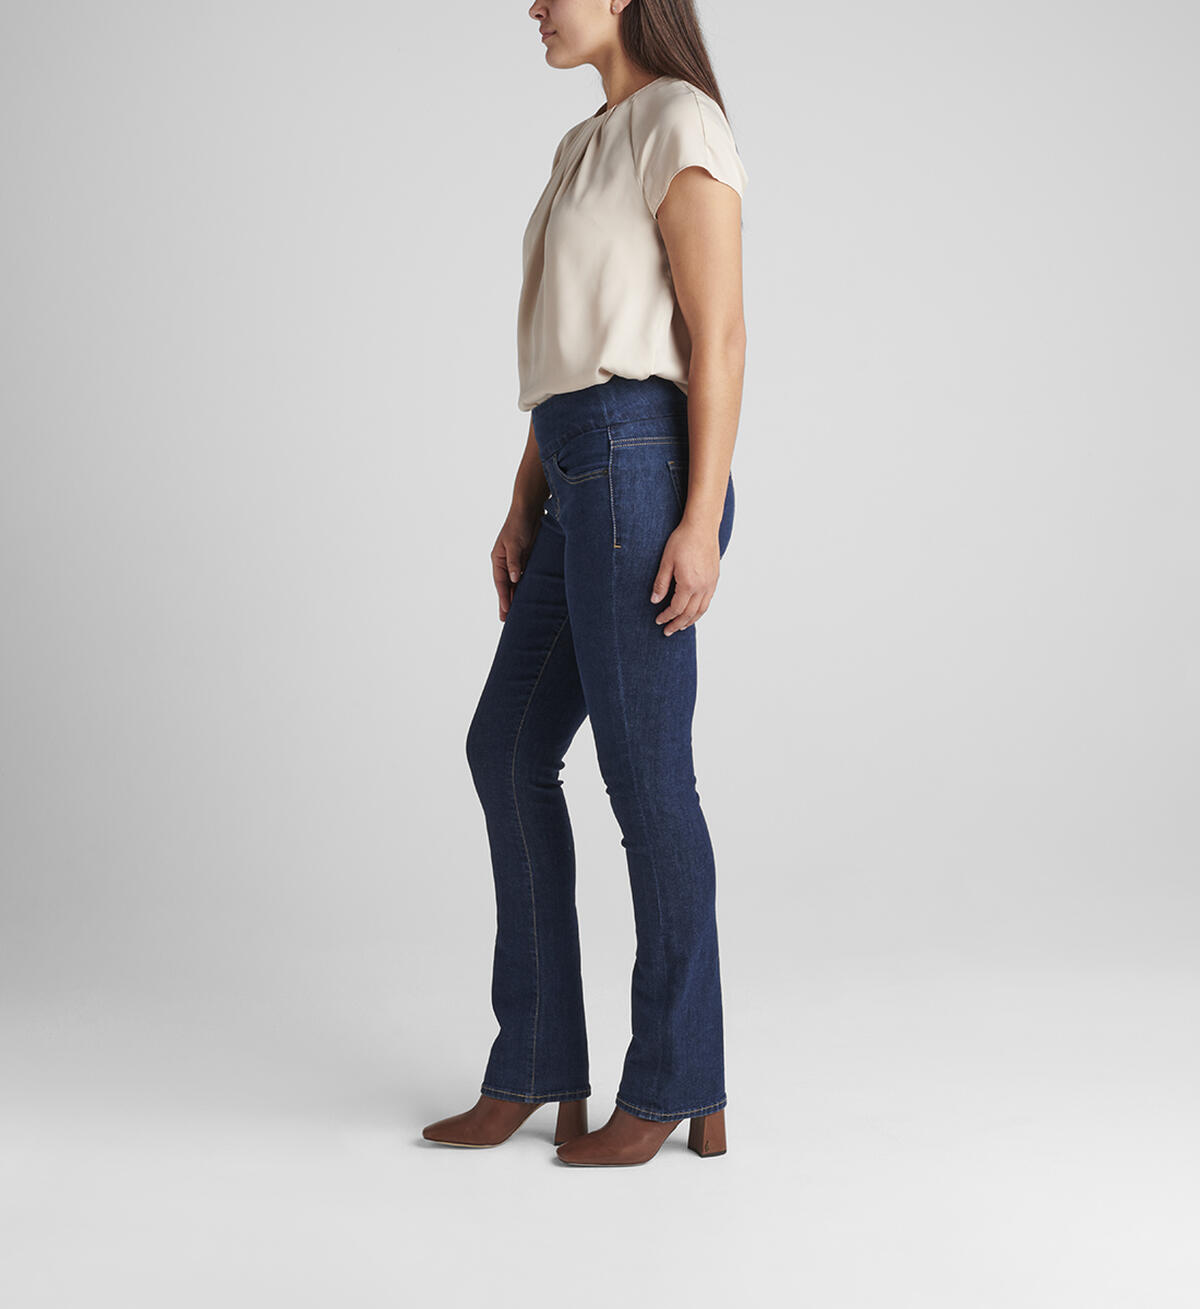 Paley Mid Rise Bootcut Pull-On Jeans, , hi-res image number 2